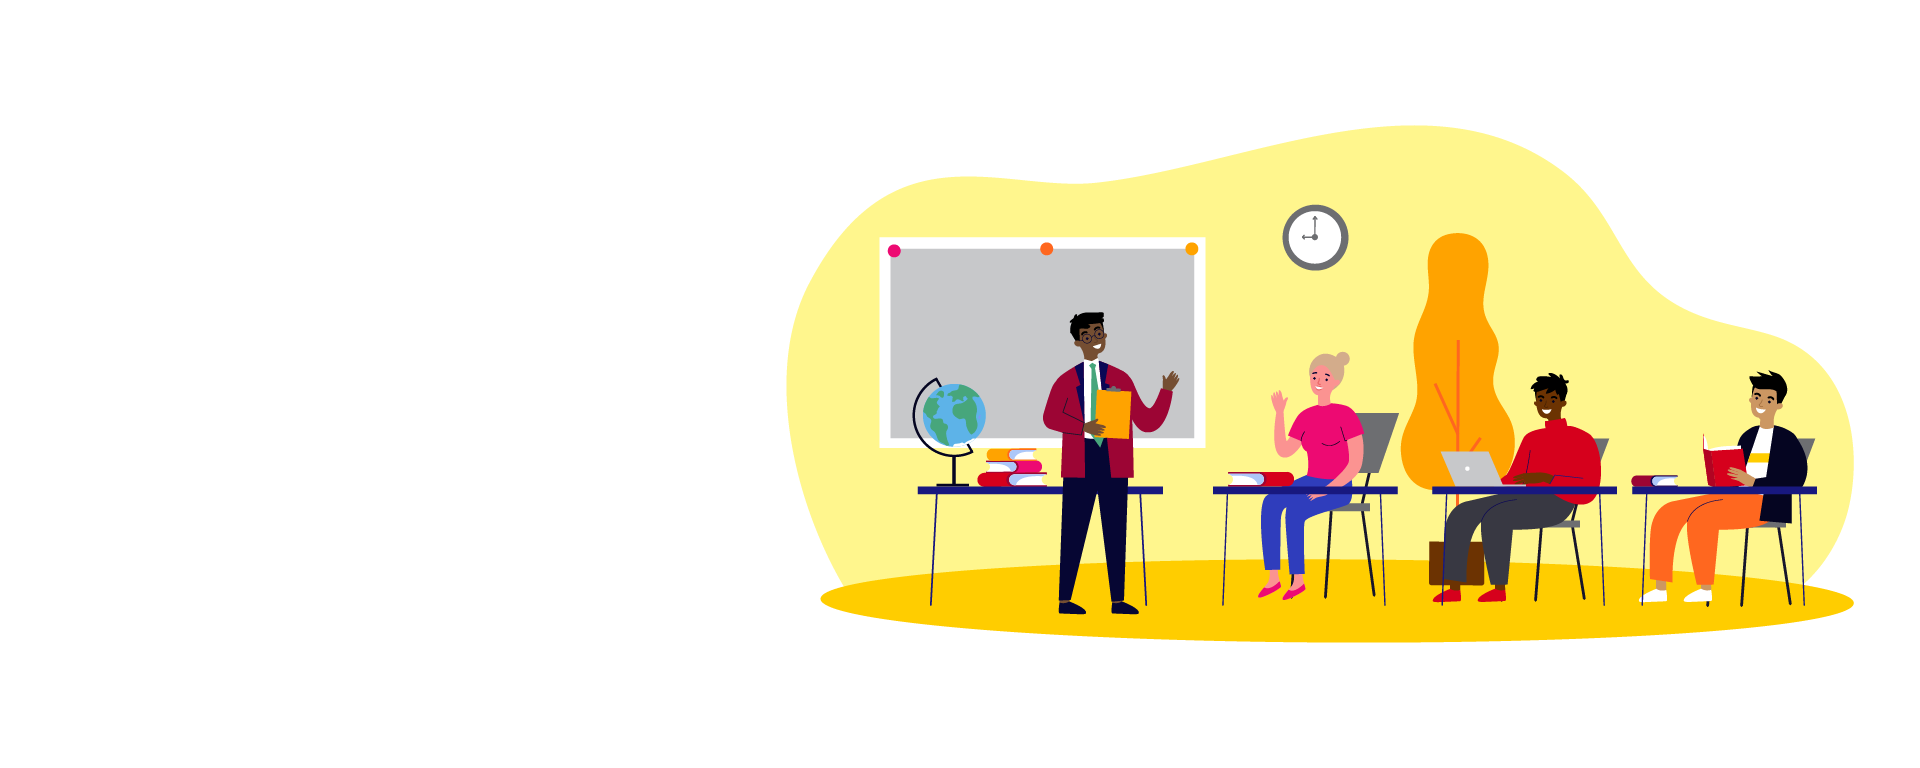 White background with illustration of a classroom where students are sitting in desks listening to an instructor